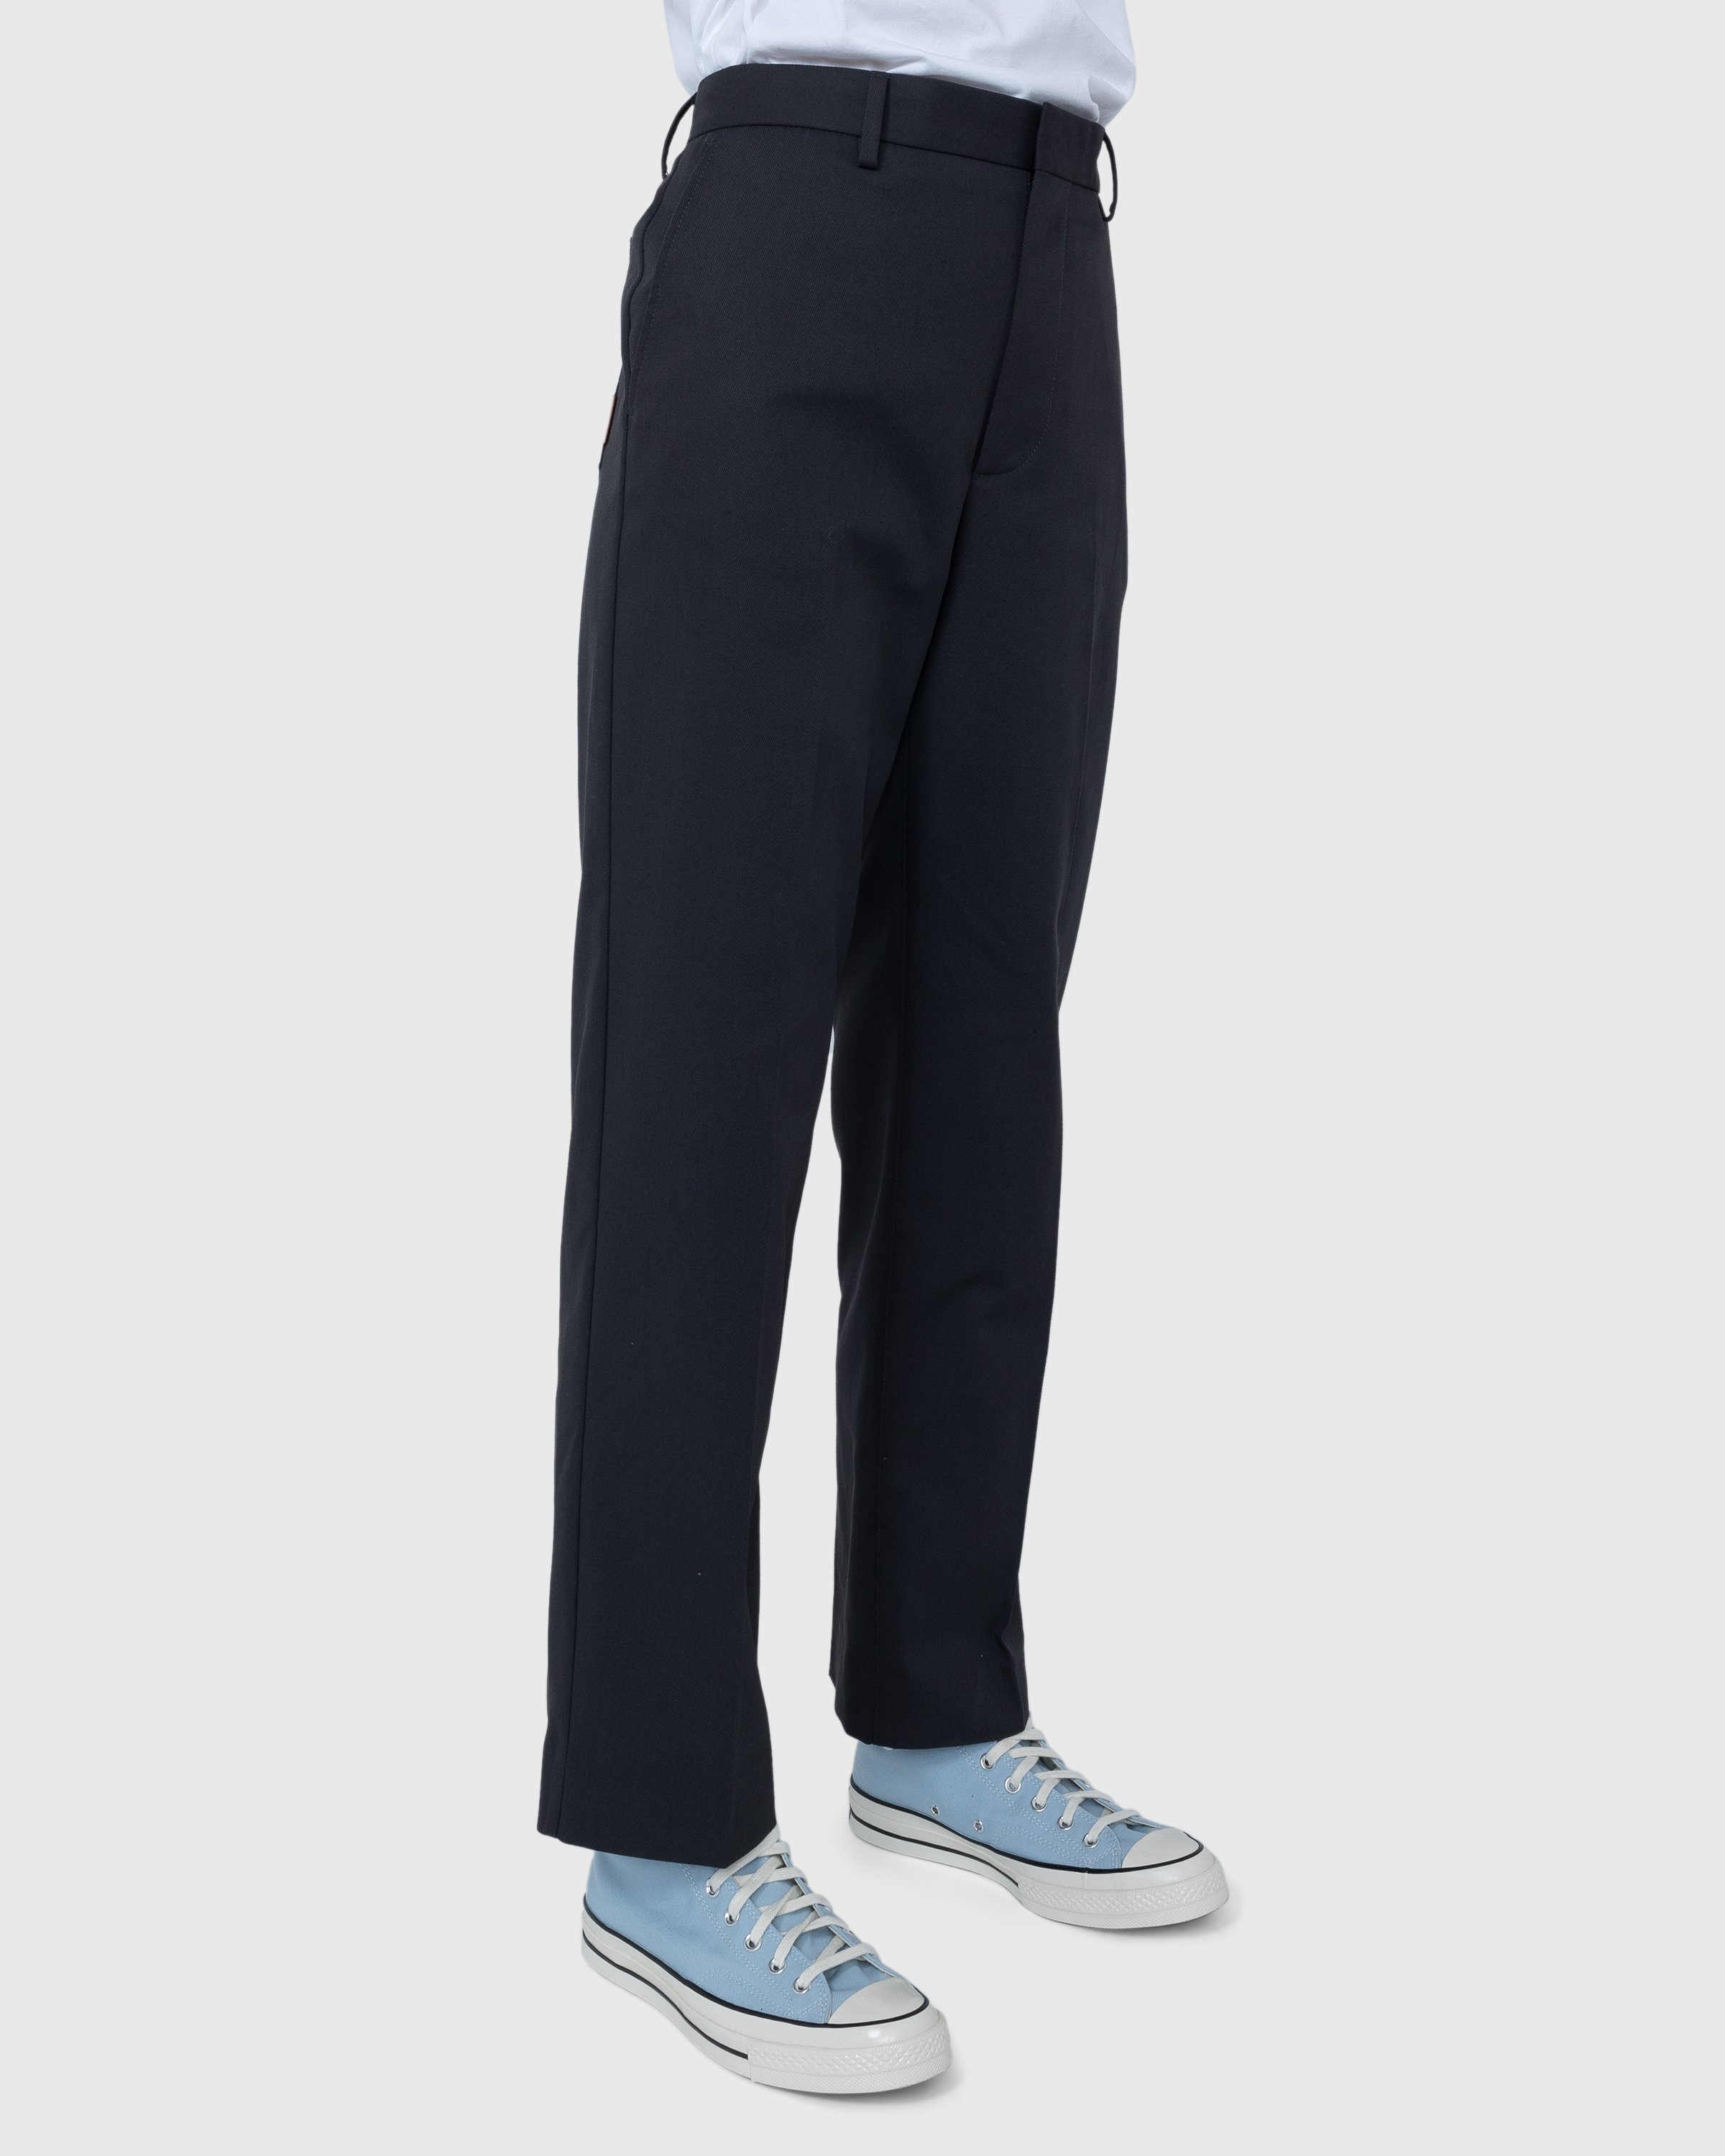 Acne Studios - Casual Trousers Anthracite Grey - Clothing - Grey - Image 3